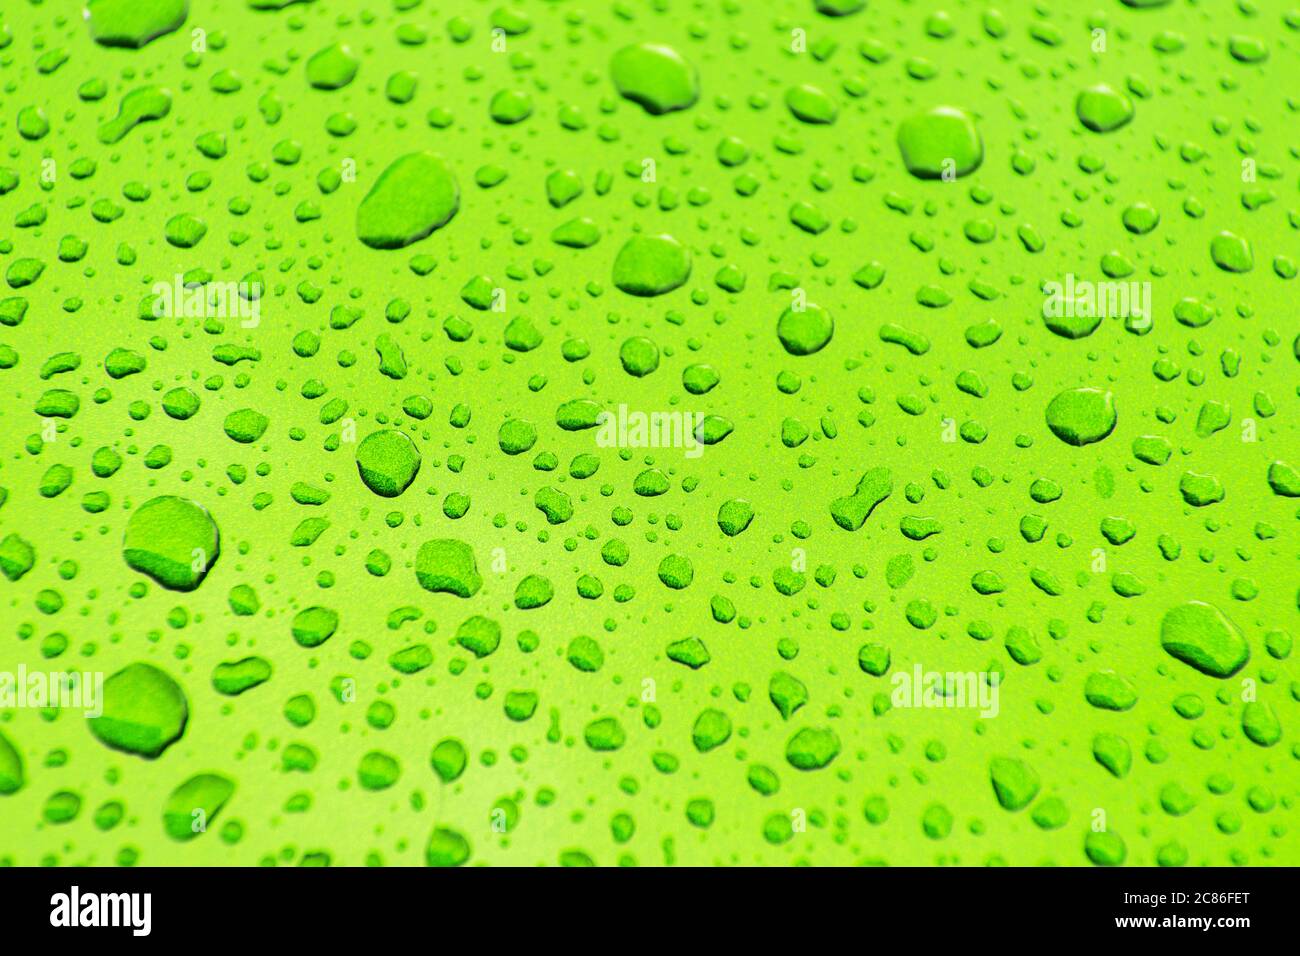 Clean and Bright Green Car Body Paint Covered by Car Wash Water Drops Close Up Background. Automotive Industry Theme. Stock Photo